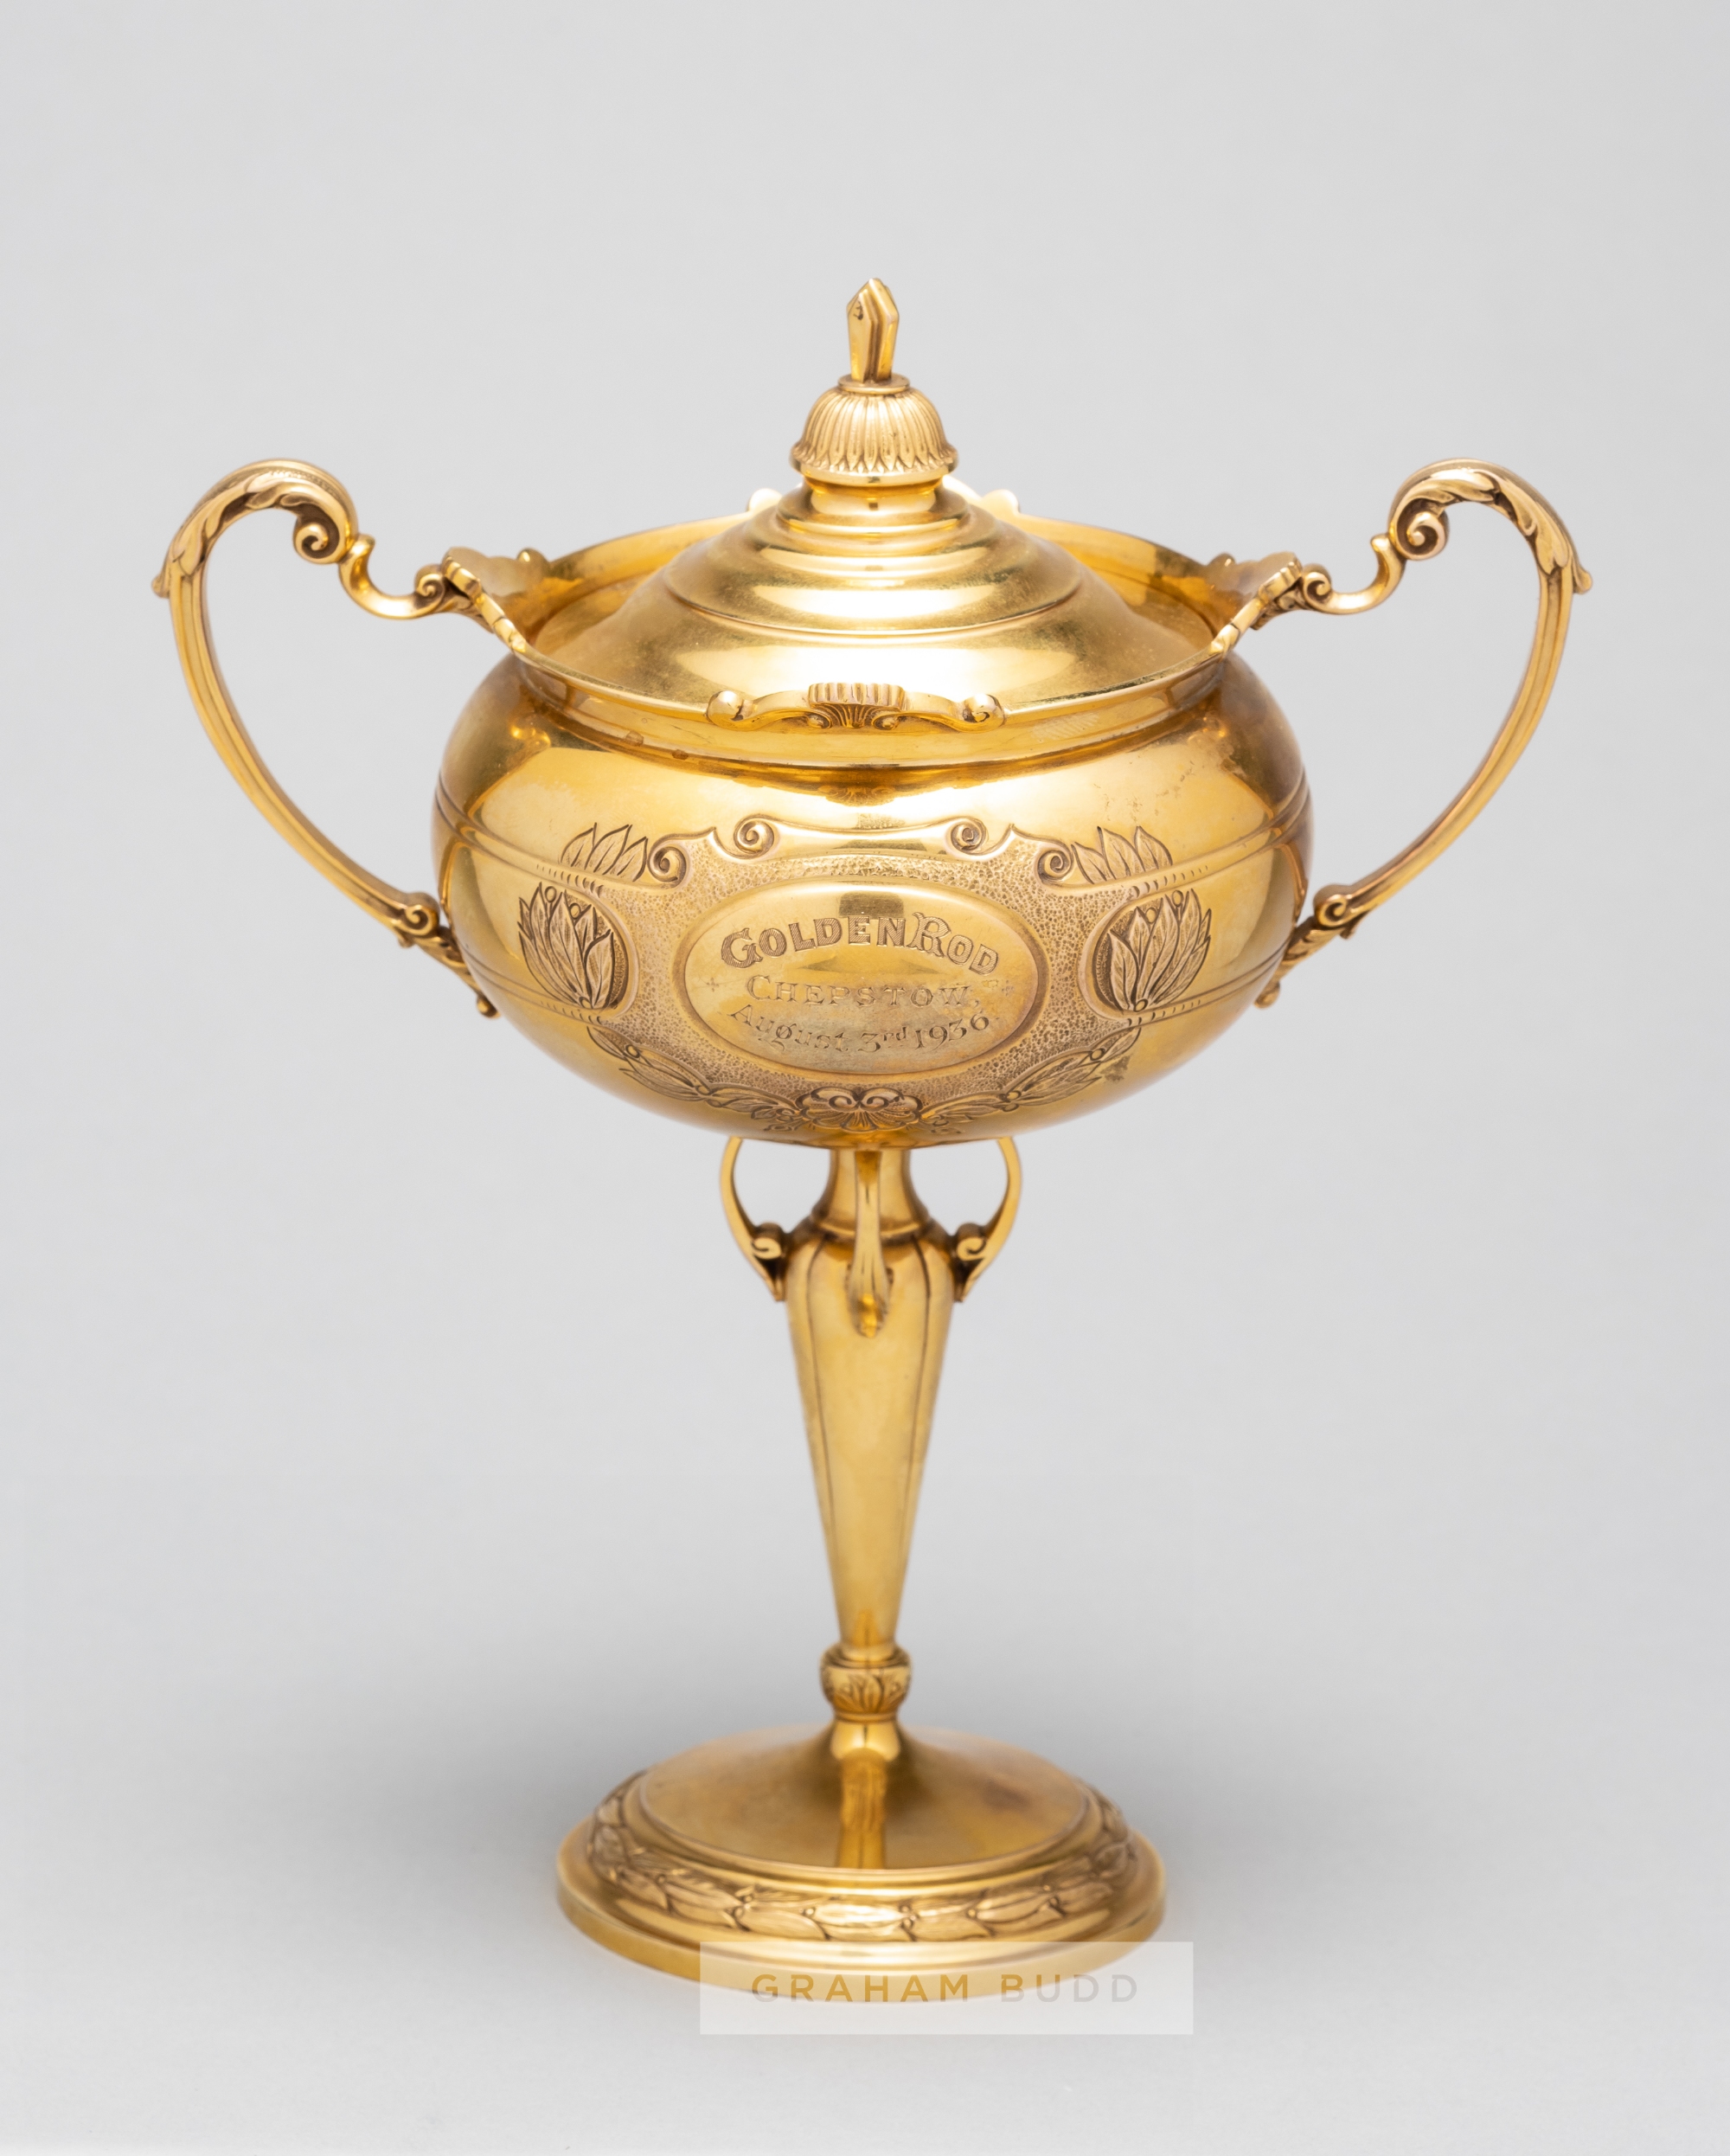 Gold horse racing trophy for the 1936 Chepstow Summer Cup, a 9ct. gold twin handled cup and cover by